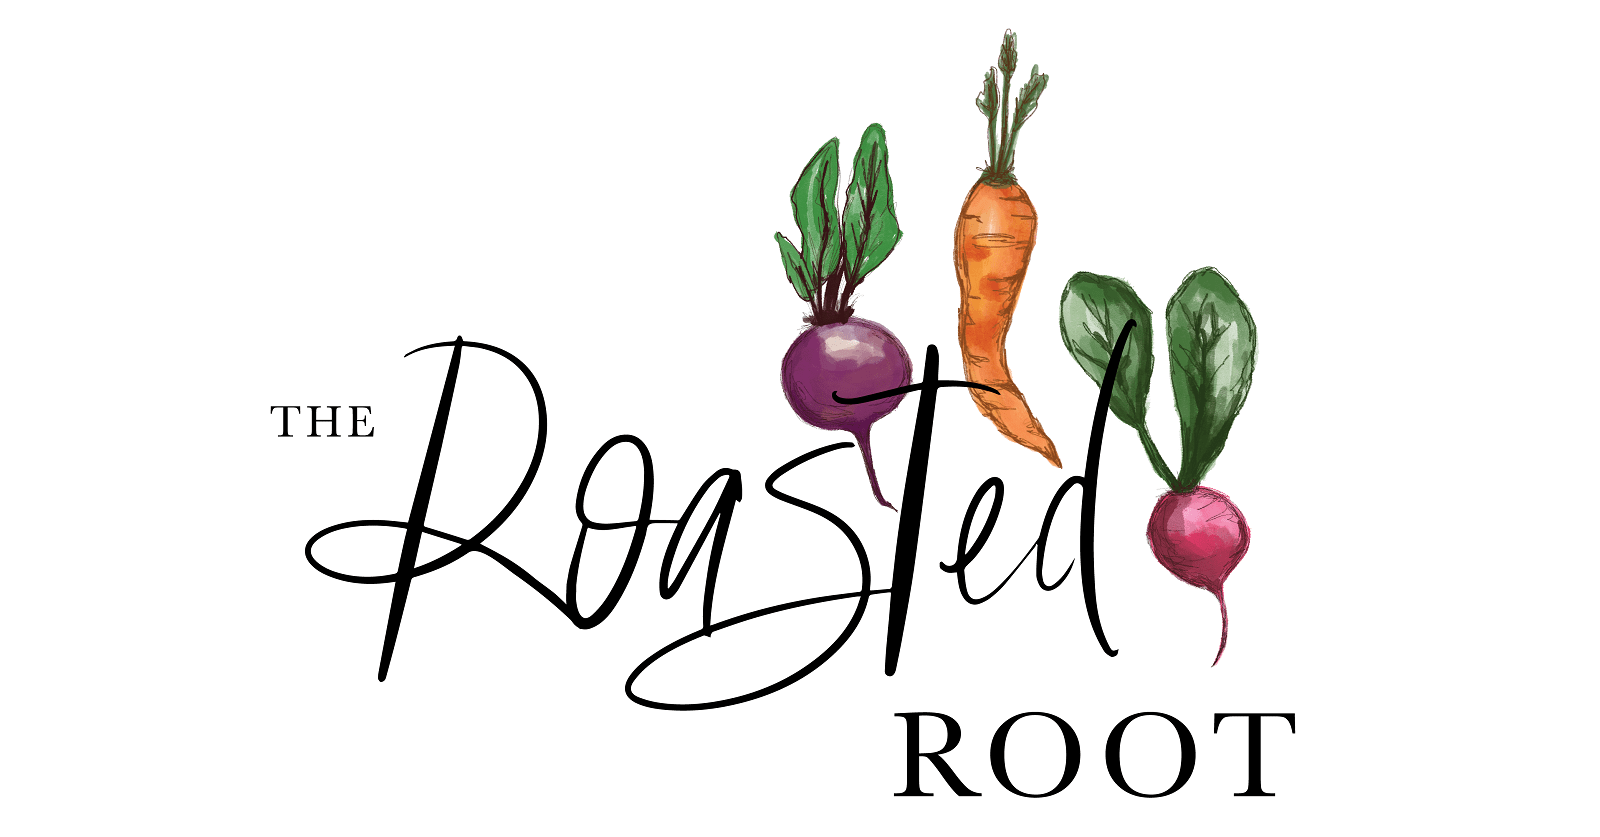 The Roasted Root